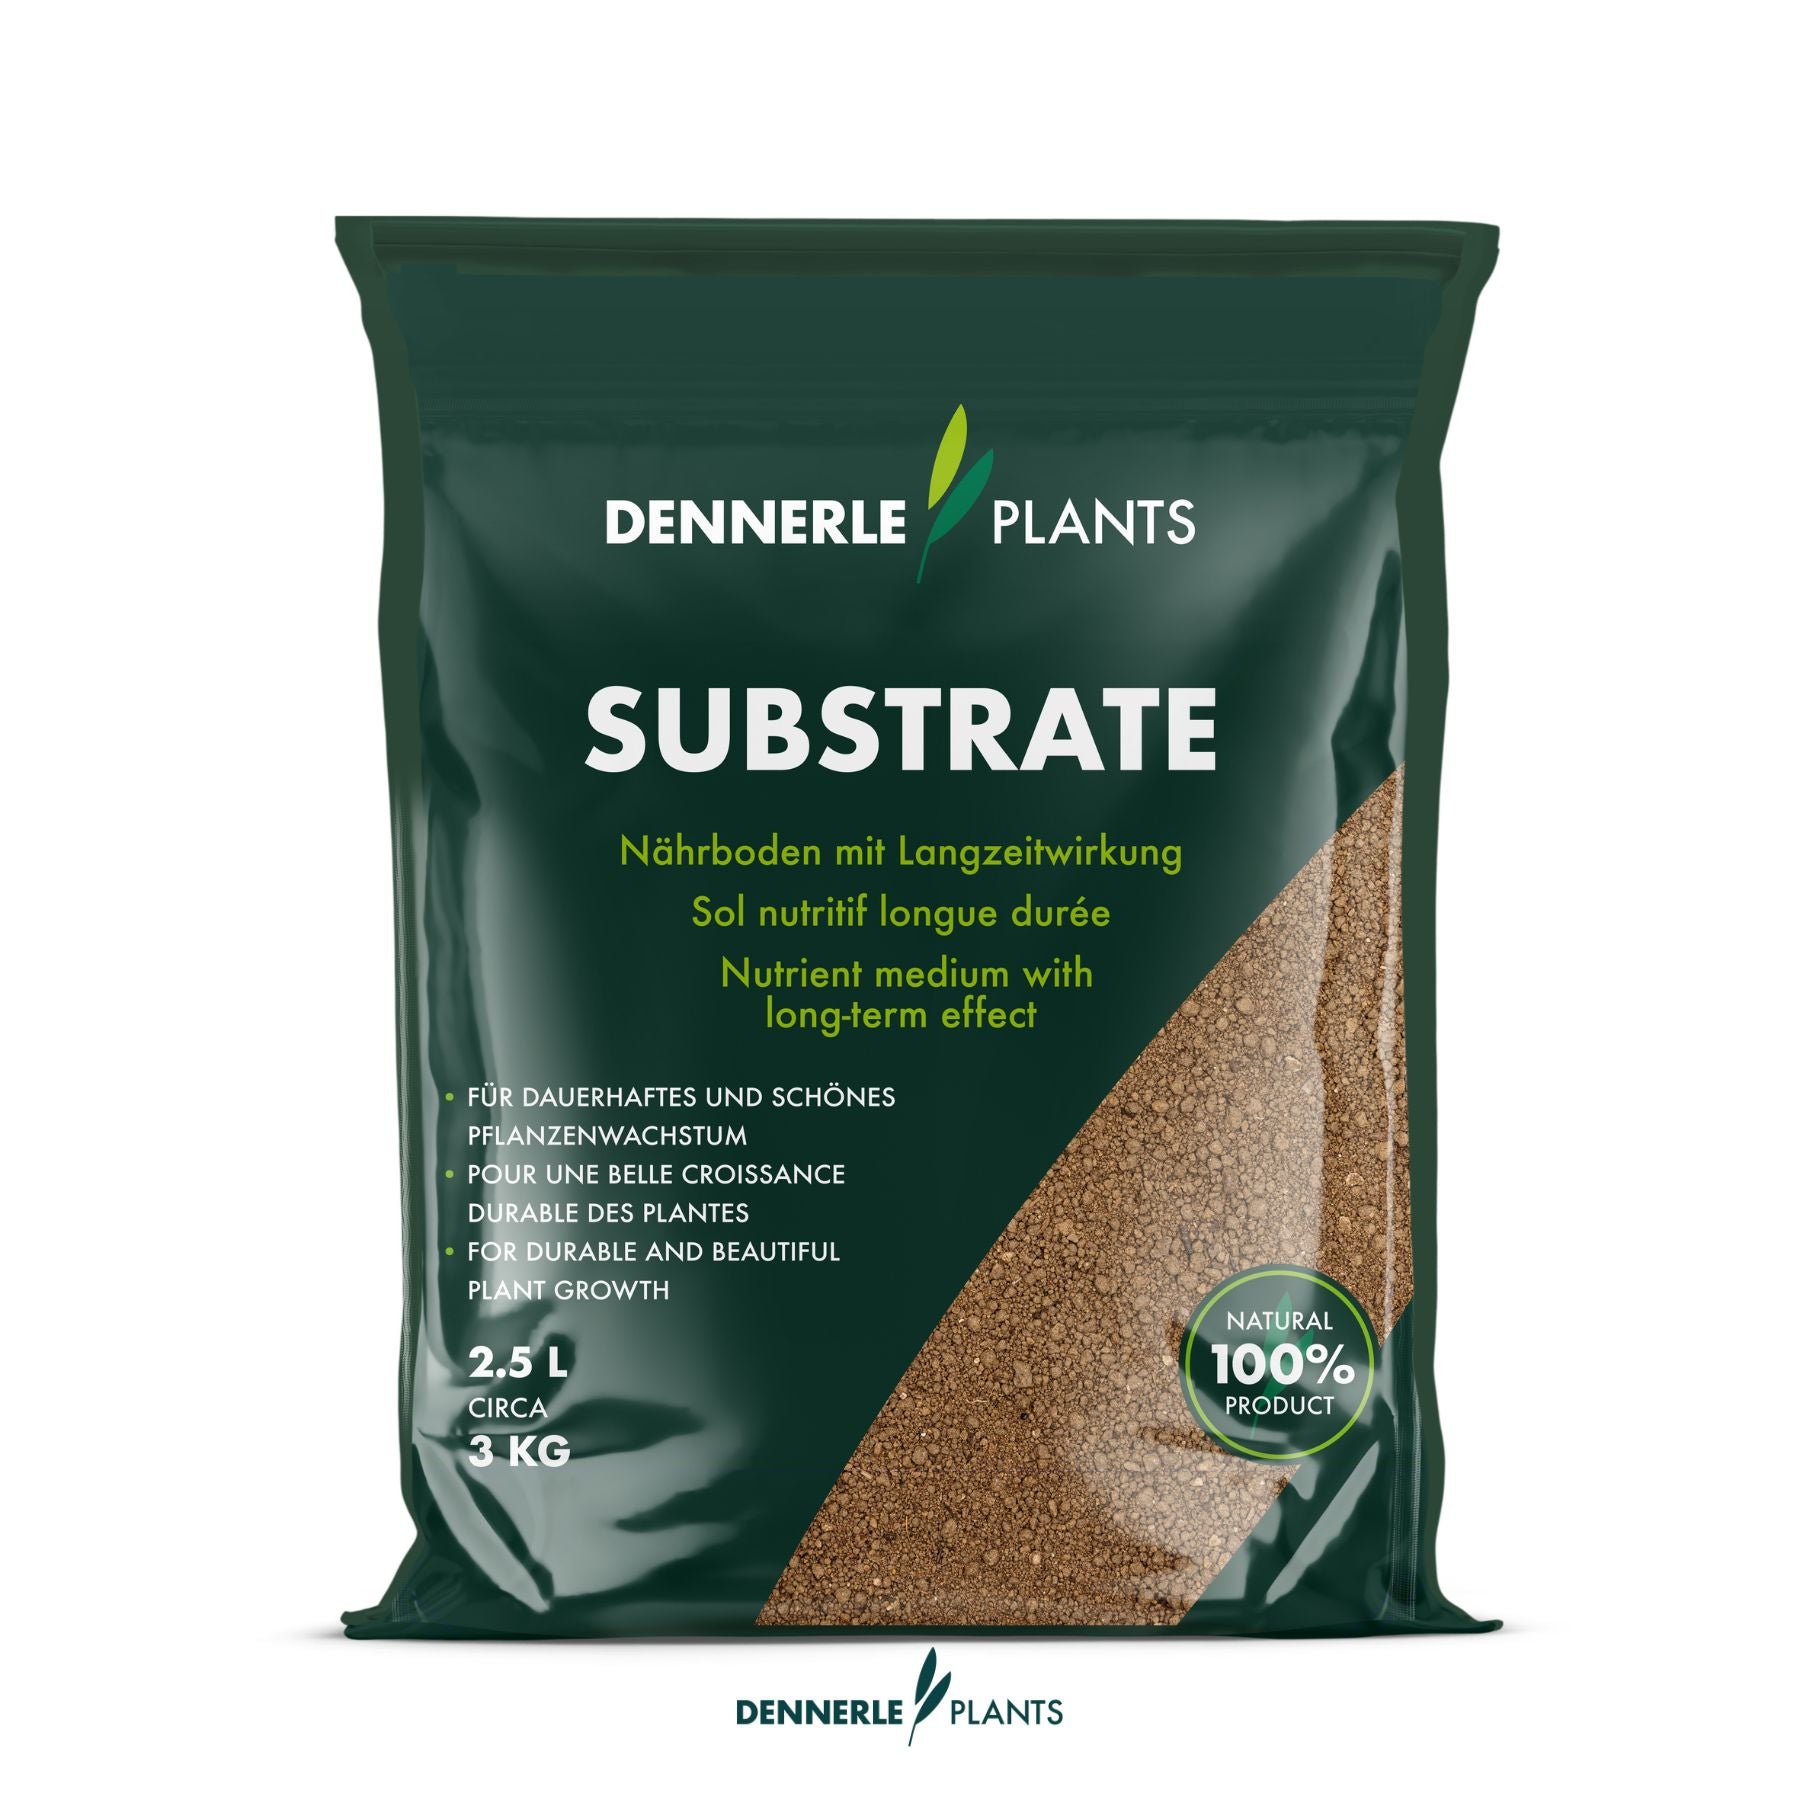 Product picture of Dennerle Plants substrate 2.5 liters 